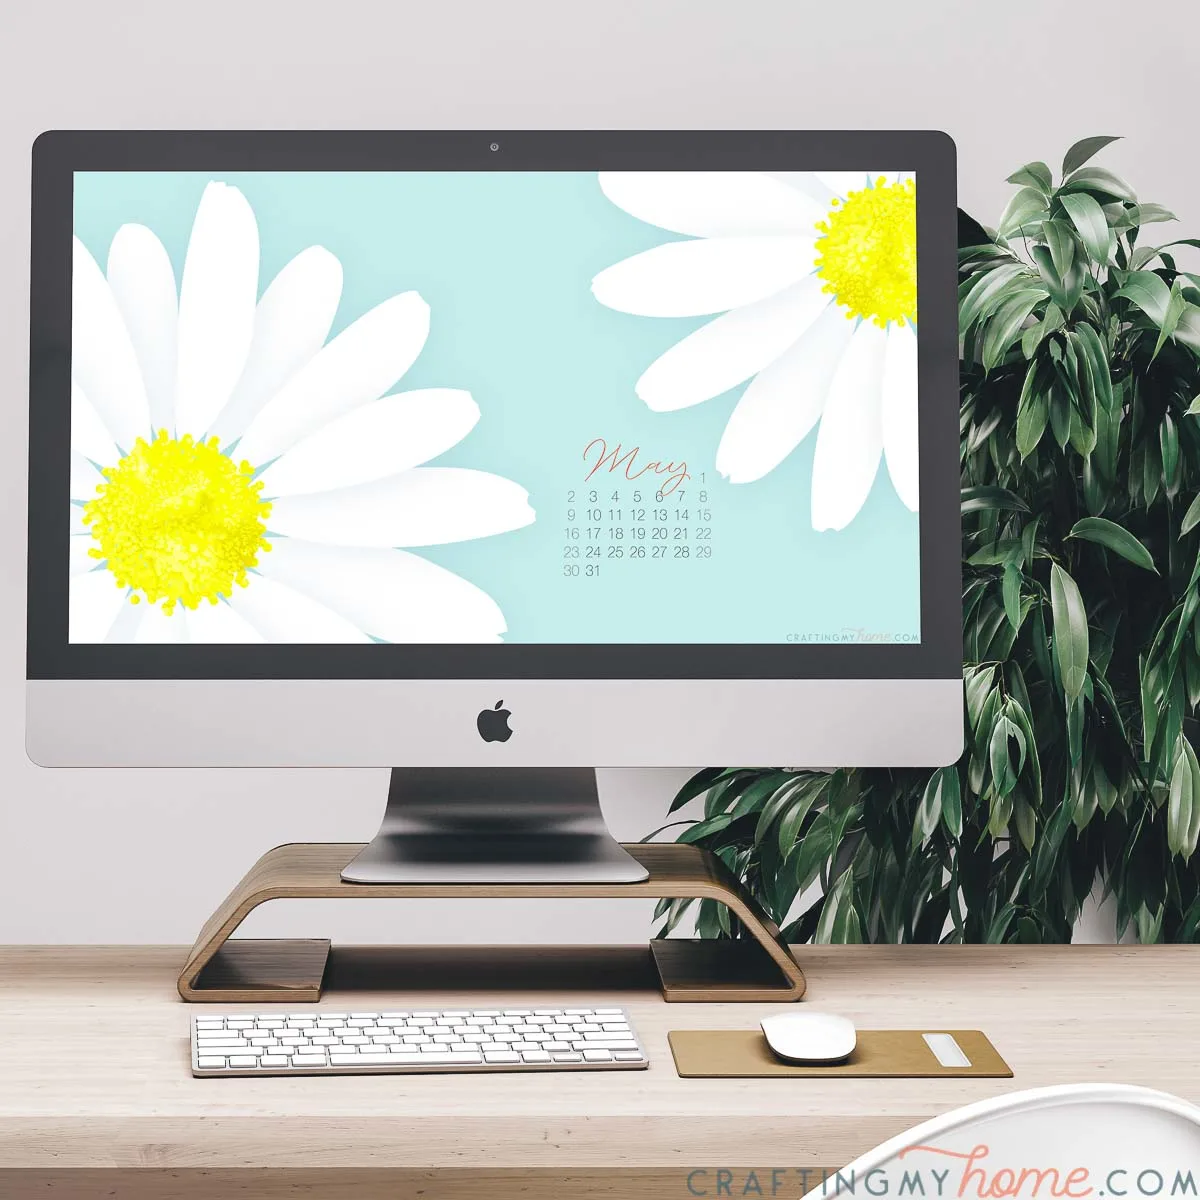 Giant daisy print digital wallpaper with calendar for May on the screen on a computer on a desk in front of a plant. 